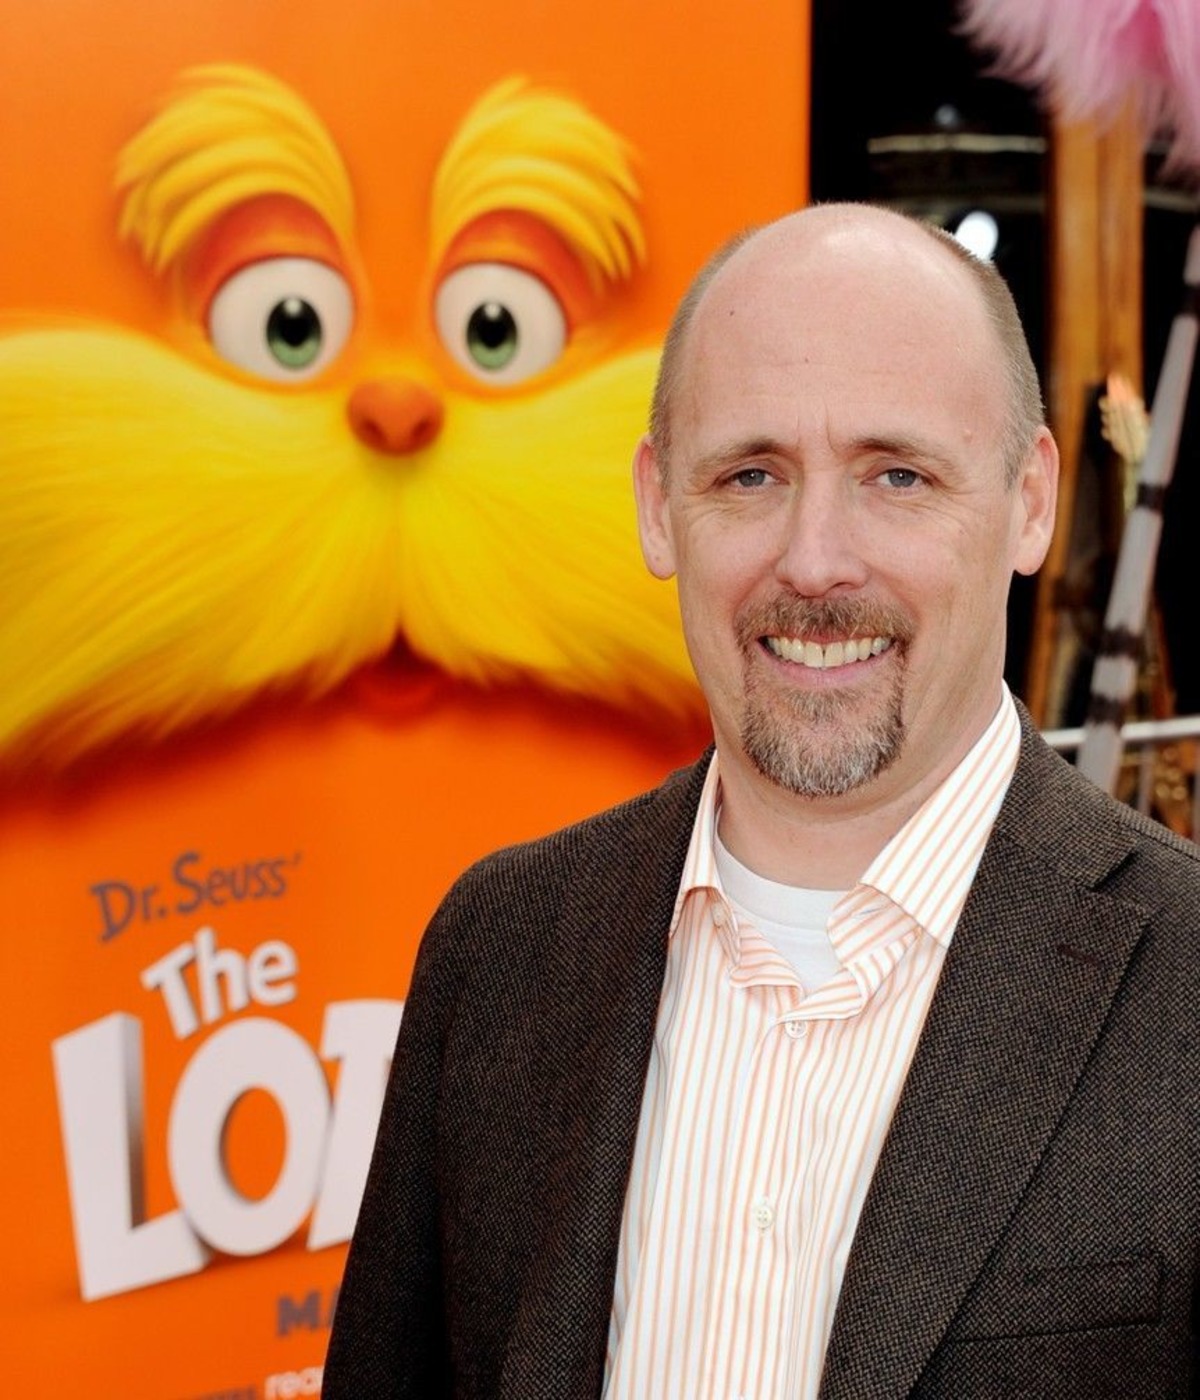 Chris Renaud in front of a poster for the animated film The Lorax.